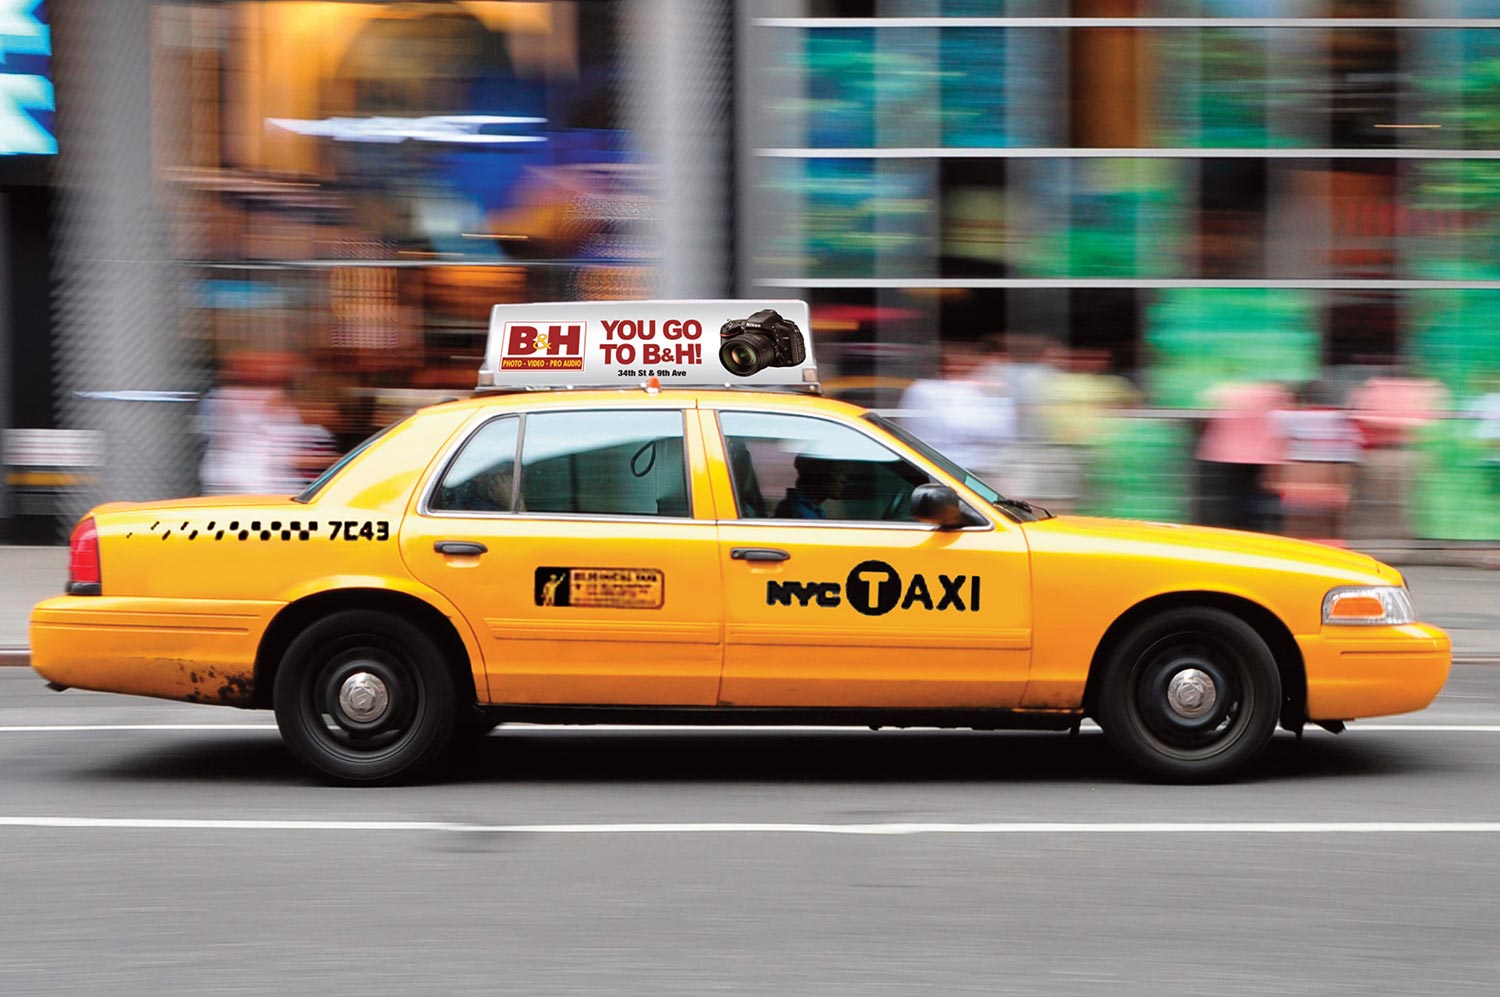 B&H---TAXI-TOP-3-(ZOOM-OUT).jpg